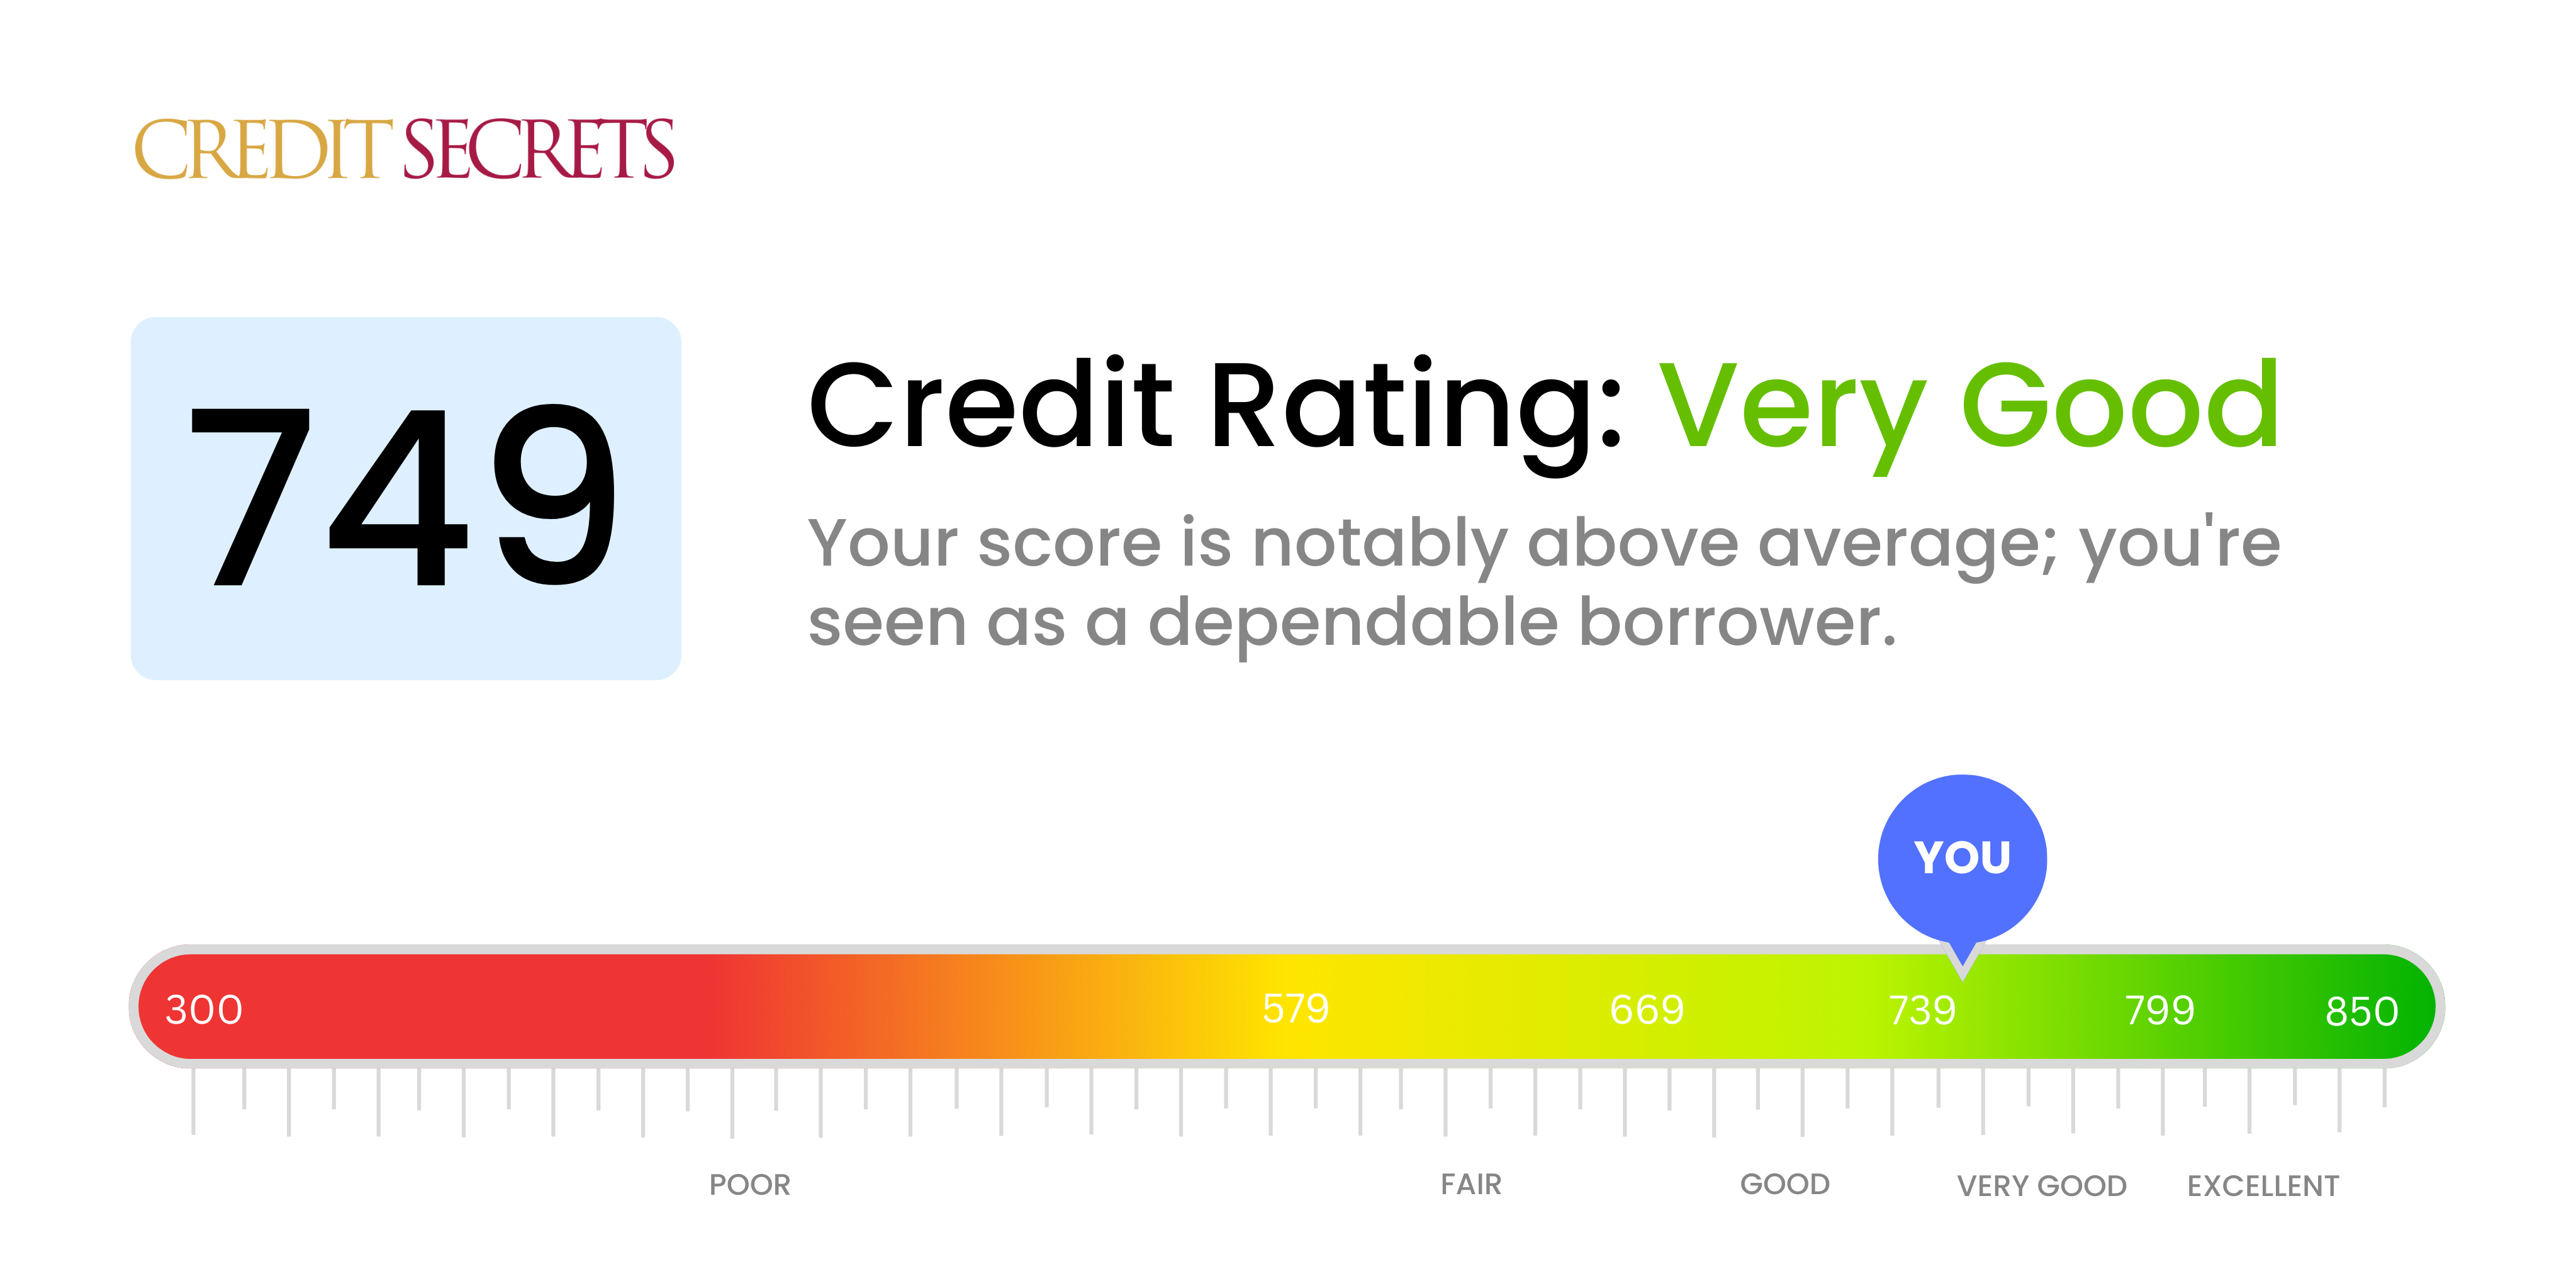 Is 749 a good credit score?